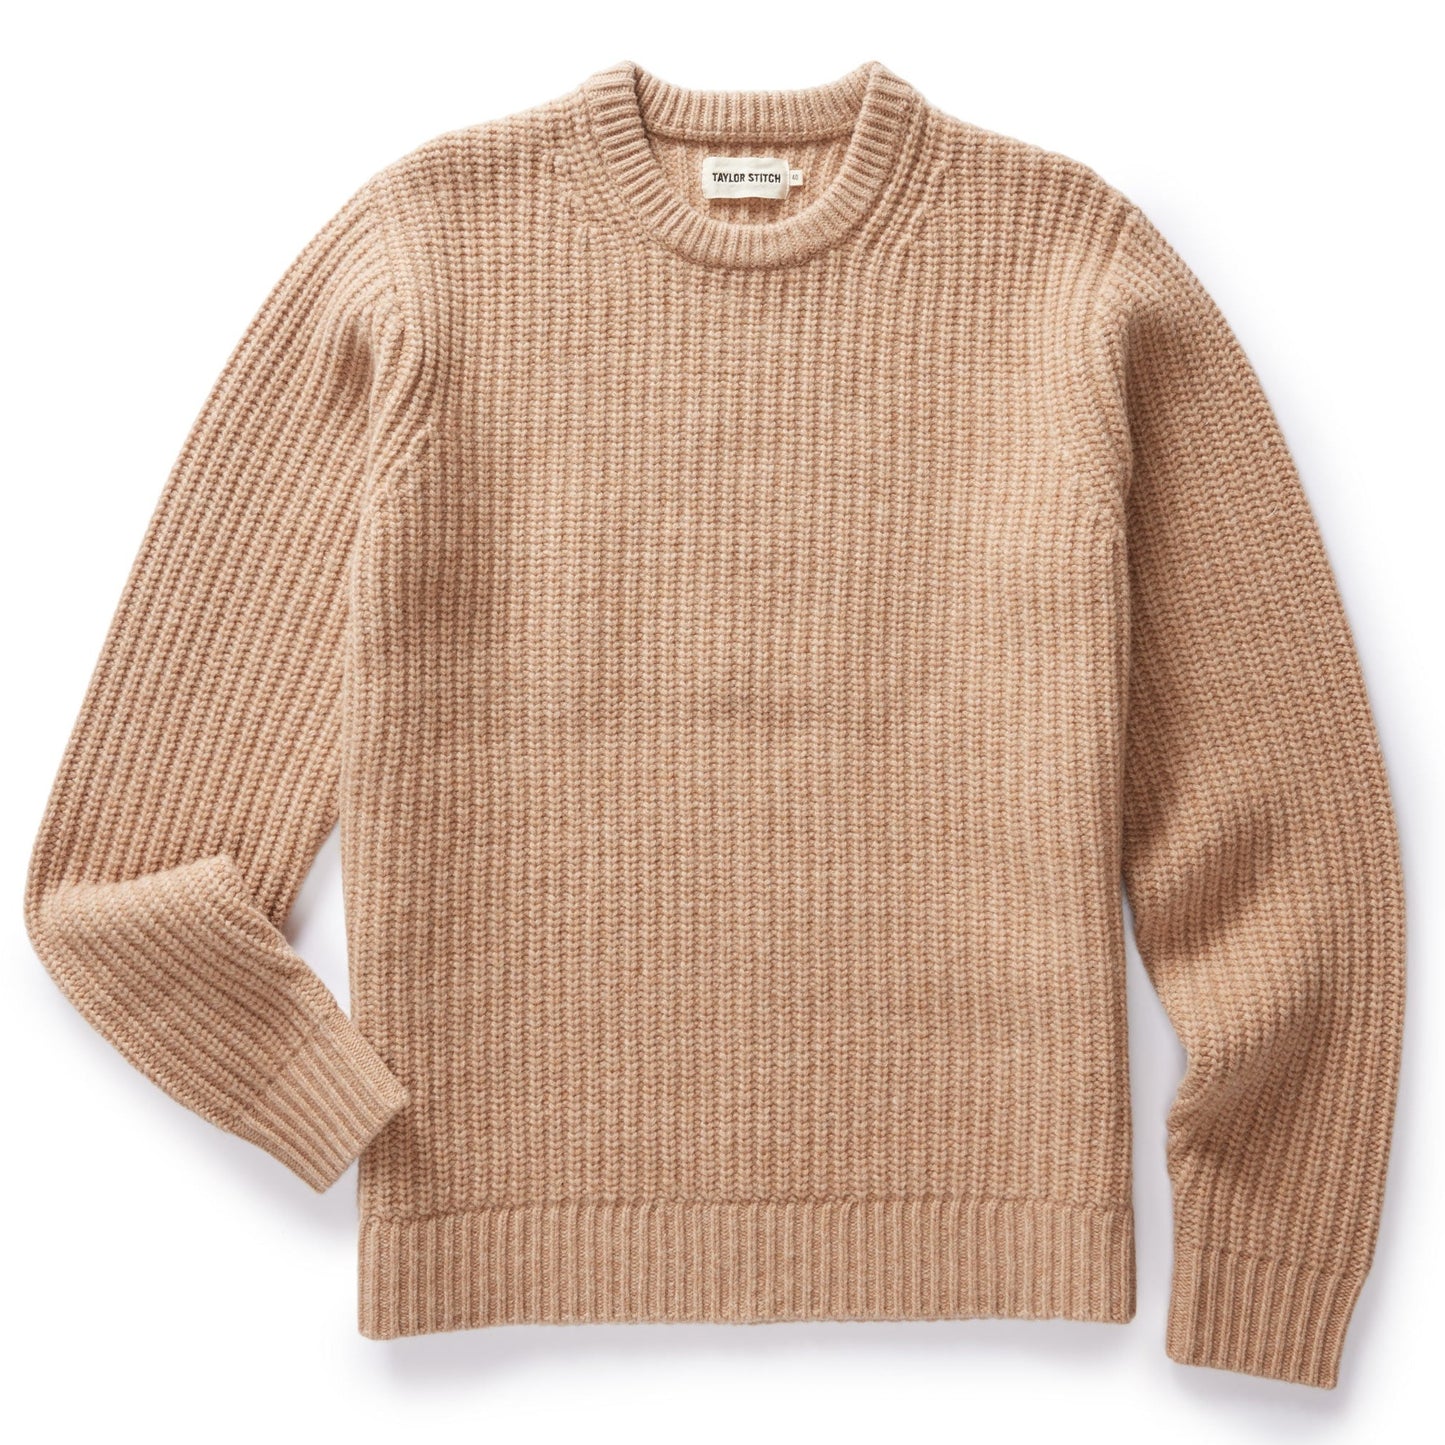 Taylor Stitch - Fisherman Sweater in Camel